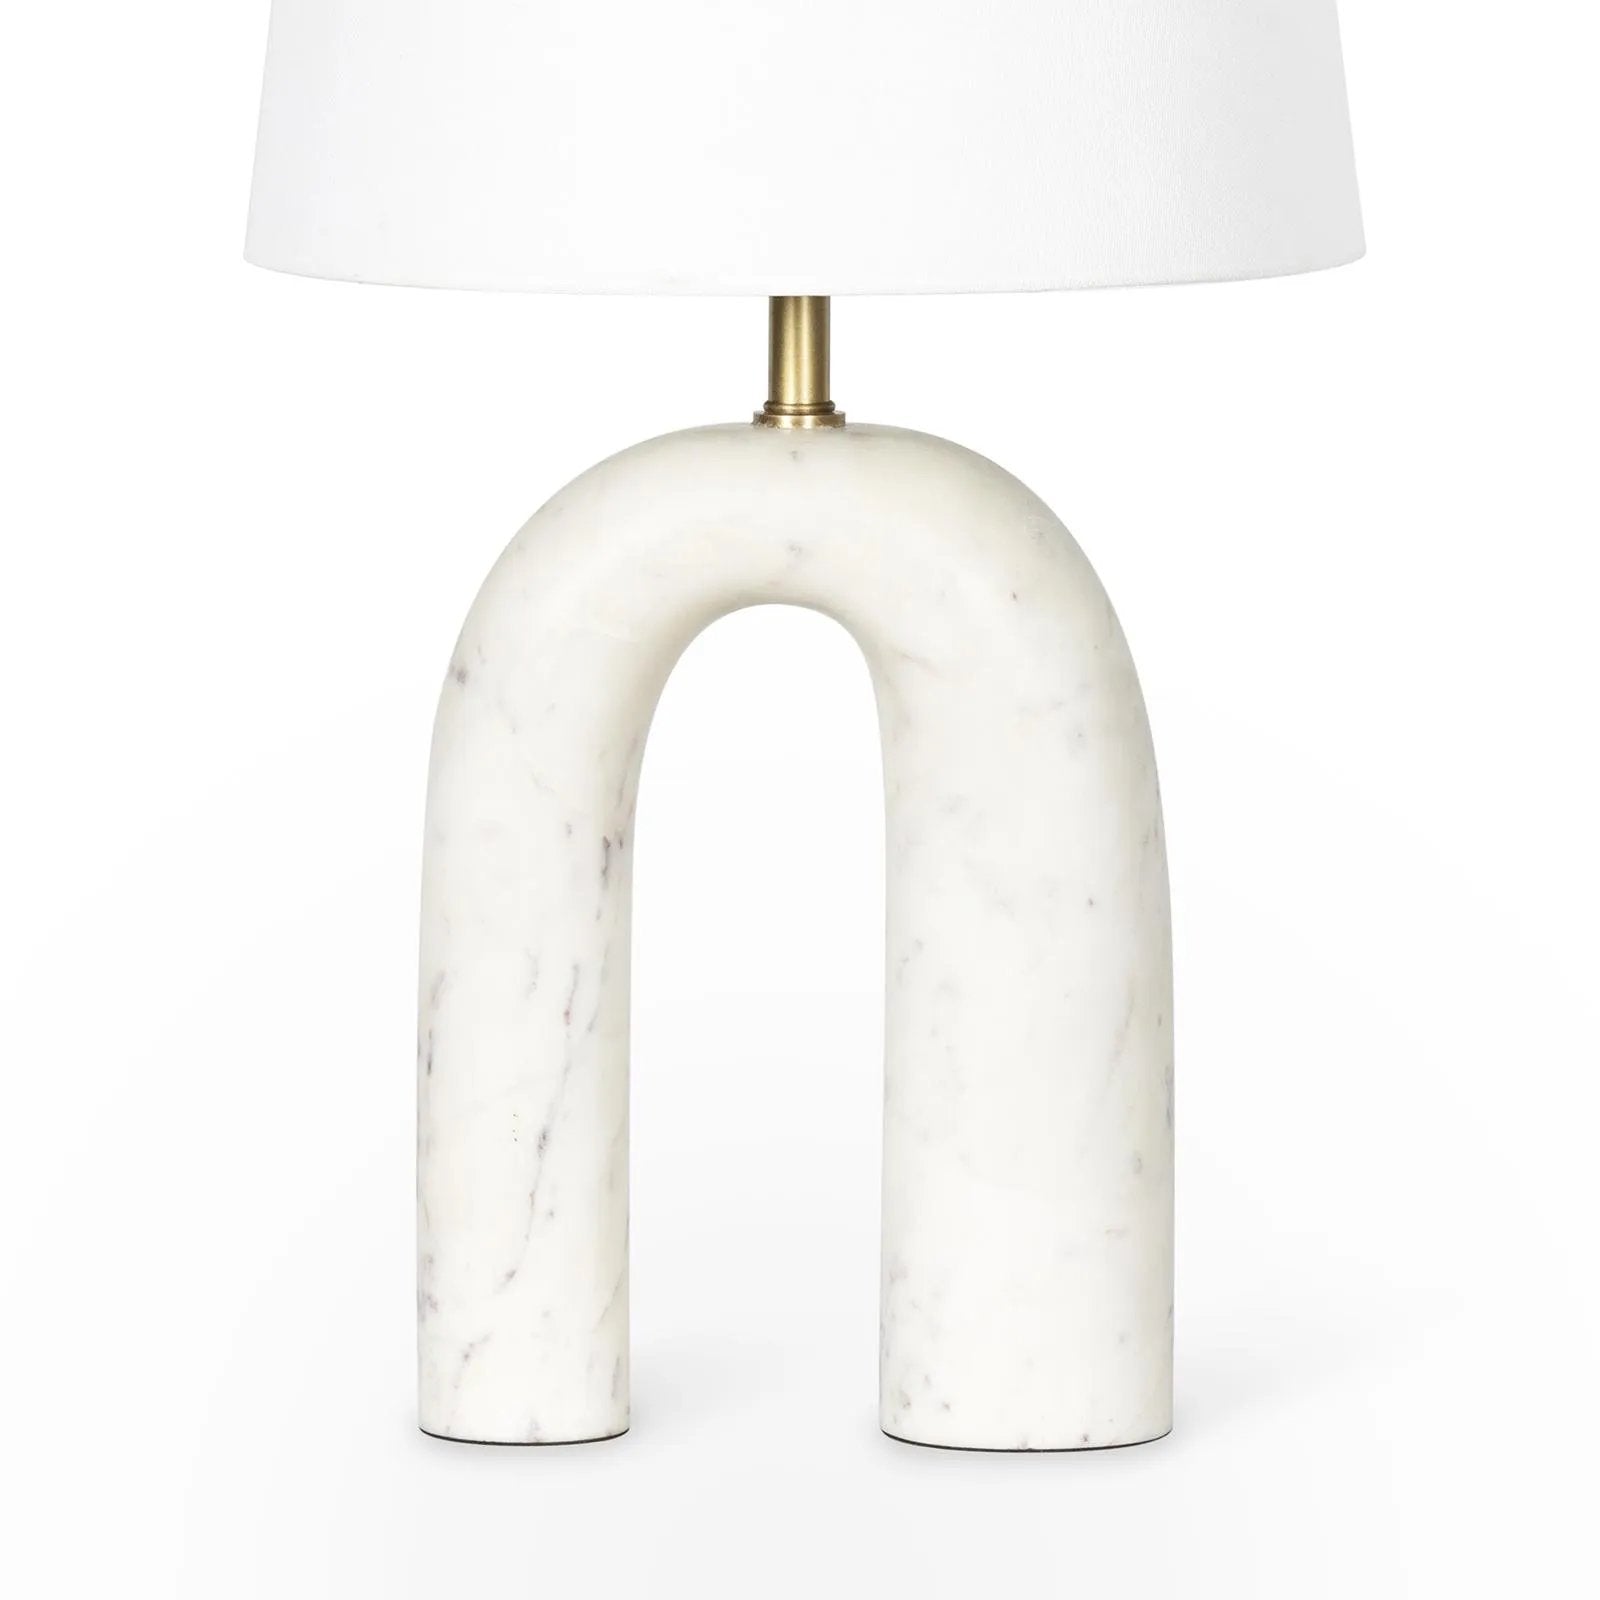 The Slinkly Marble Table Lamp is a seamless blend of elegance and nature. Crafted from solid marble, each piece is completely unique and its architecturally inspired base embodies modern sophistication. Elevate your interiors by placing it on a console table, desk, or bedside. Amethyst Home provides interior design, new home construction design consulting, vintage area rugs, and lighting in the Portland metro area.